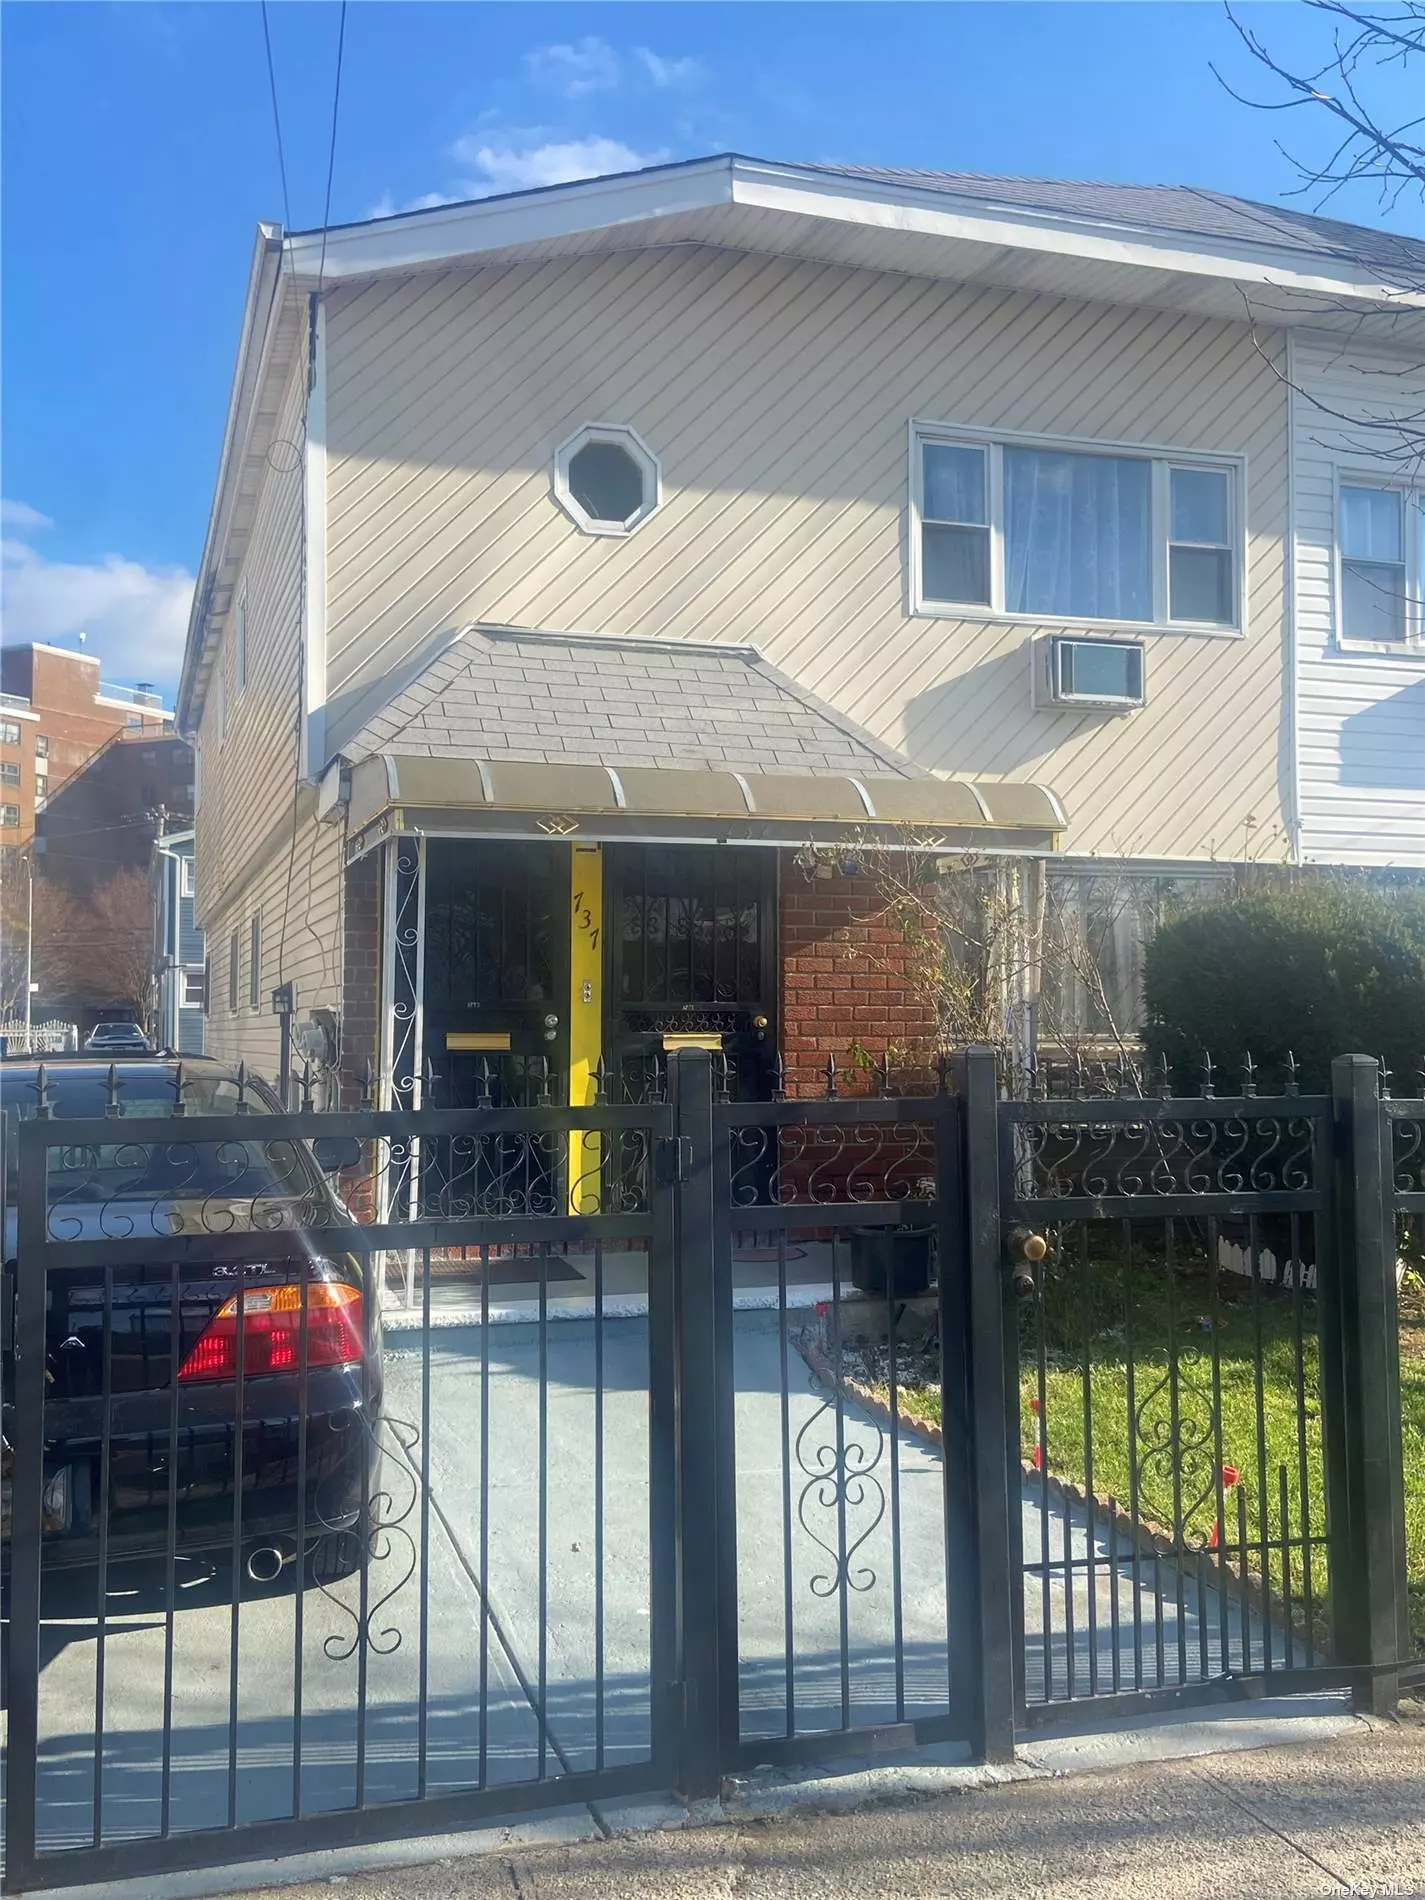 Beautiful Duplex Home Style features 6 Bedrooms, 2 bathrooms, 2 kitchens, and a Finished Basement. Located in Brooklyn, within walking distance to public transportation. Excellent investment opportunity!